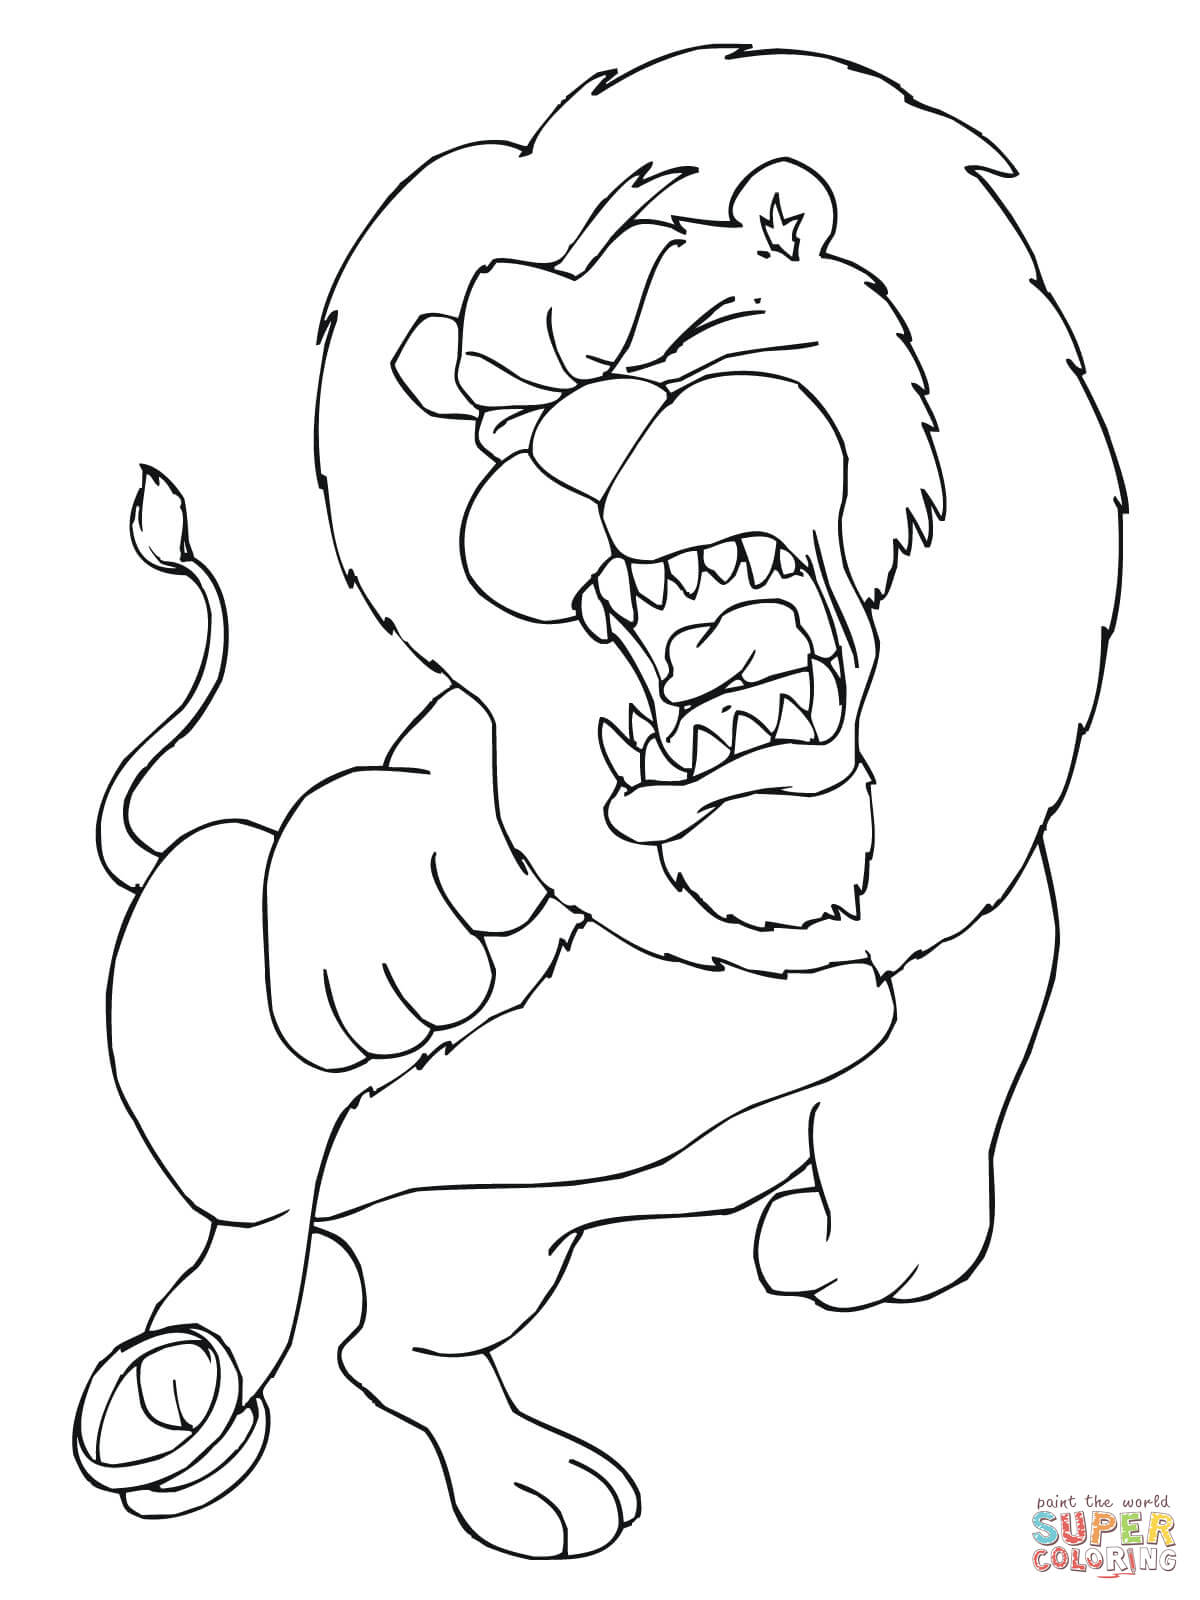 1539417484_trapped-lion-coloring-page para colorir